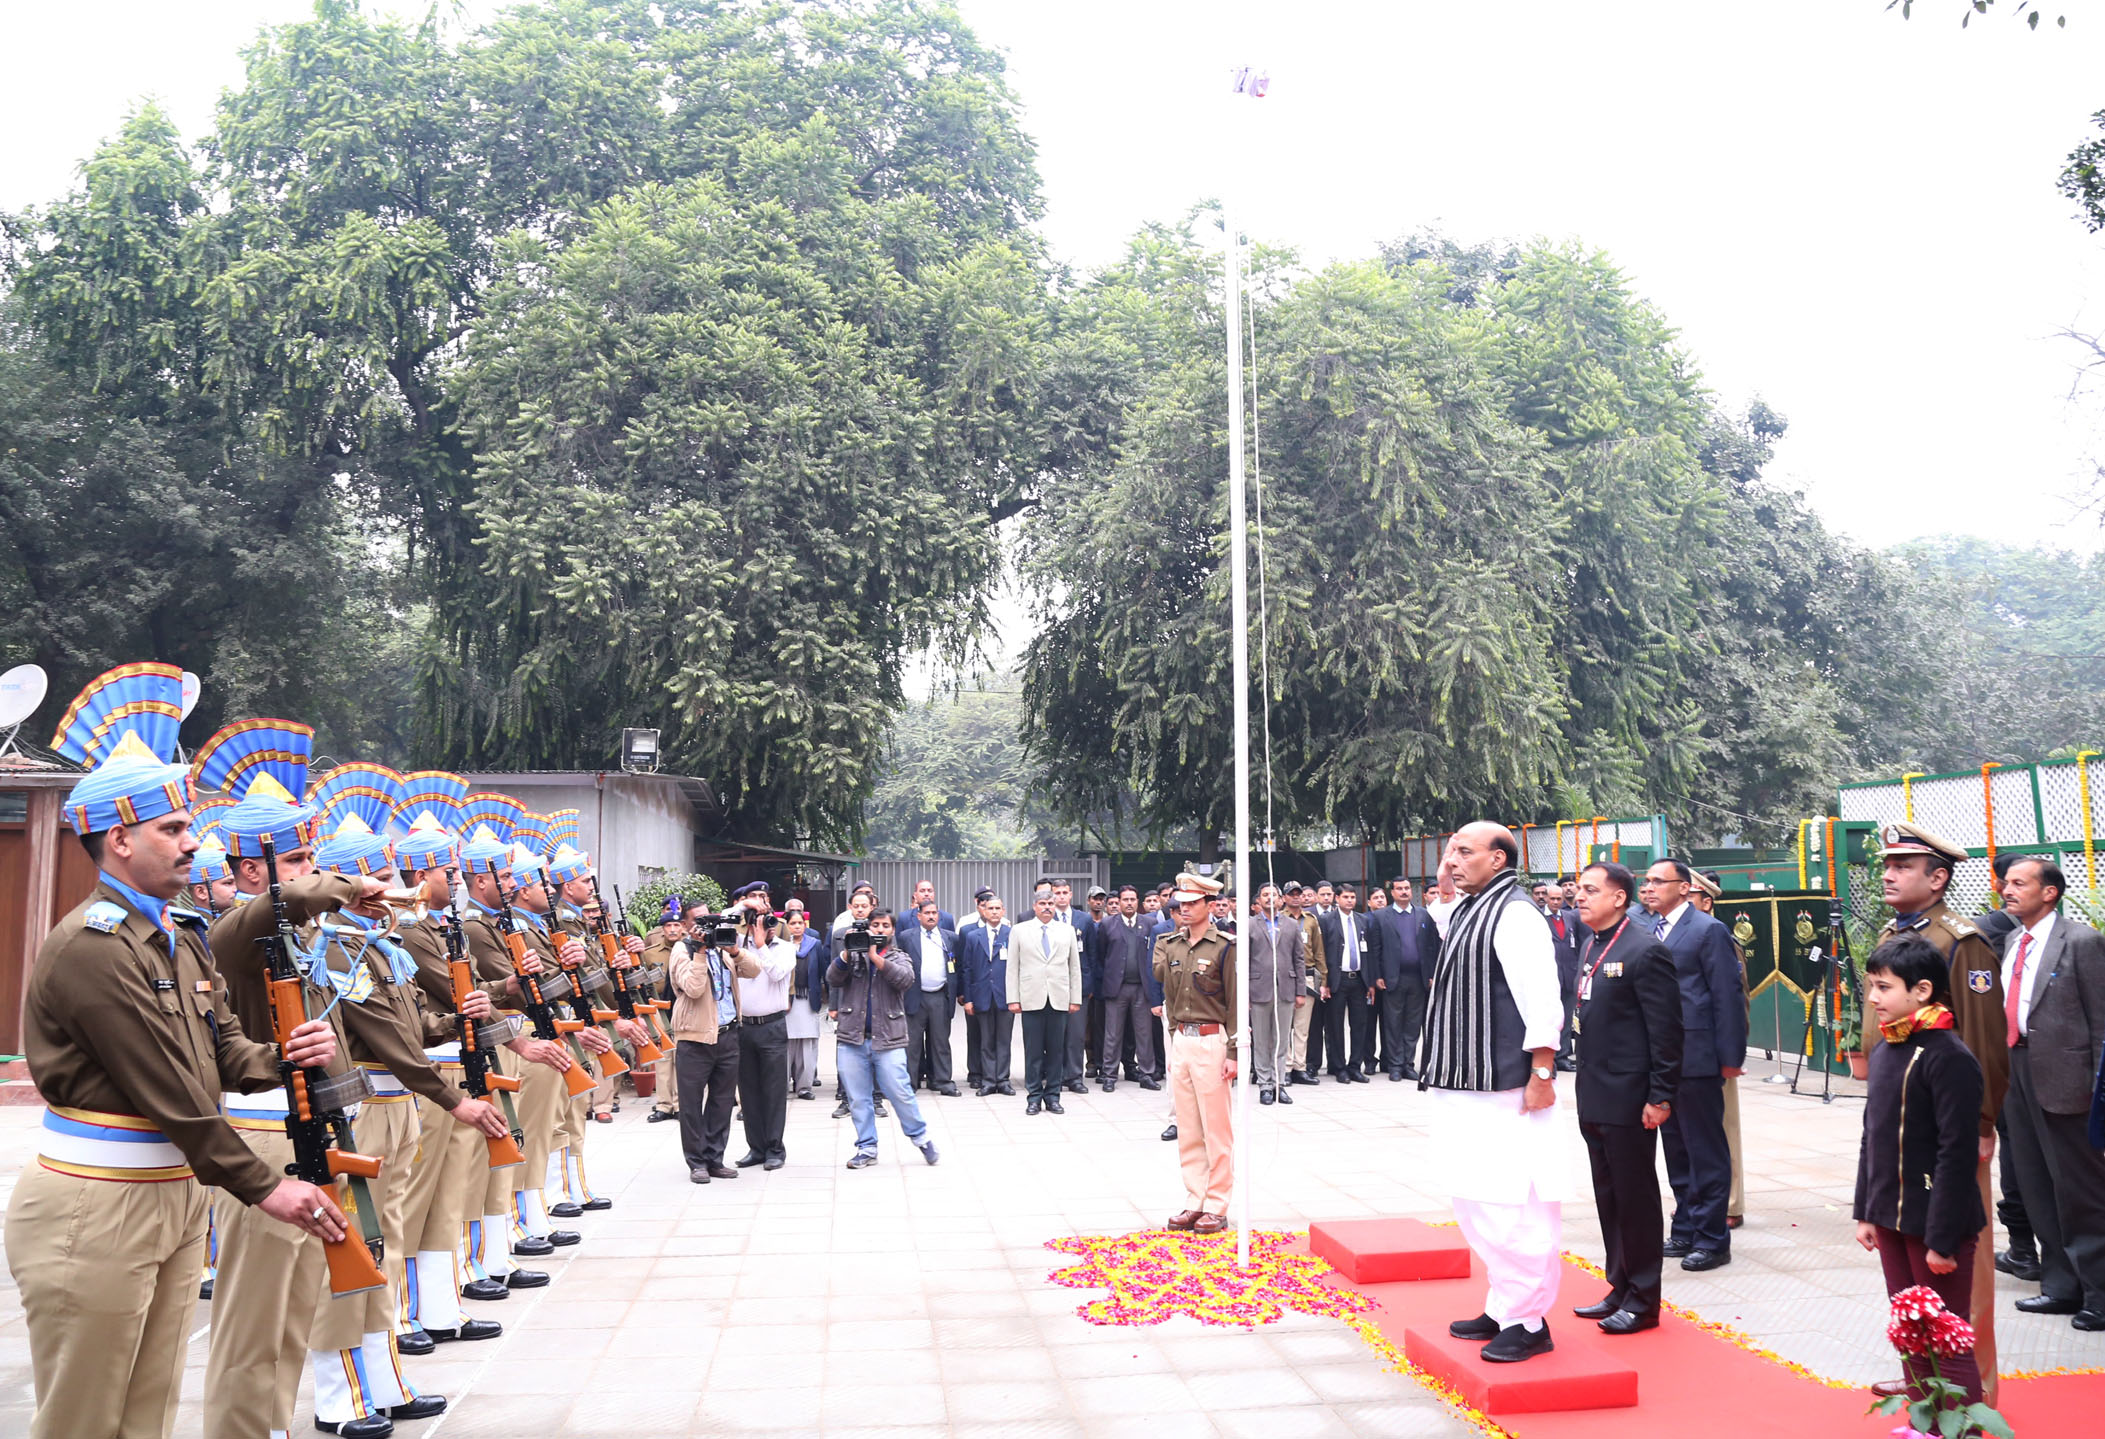 The Union Home Minister, Shri Rajnath Singh taking the salute after unfurling the National Flag, on the occasion of the 68th Republic Day, in New Delhi on January 26, 2017.